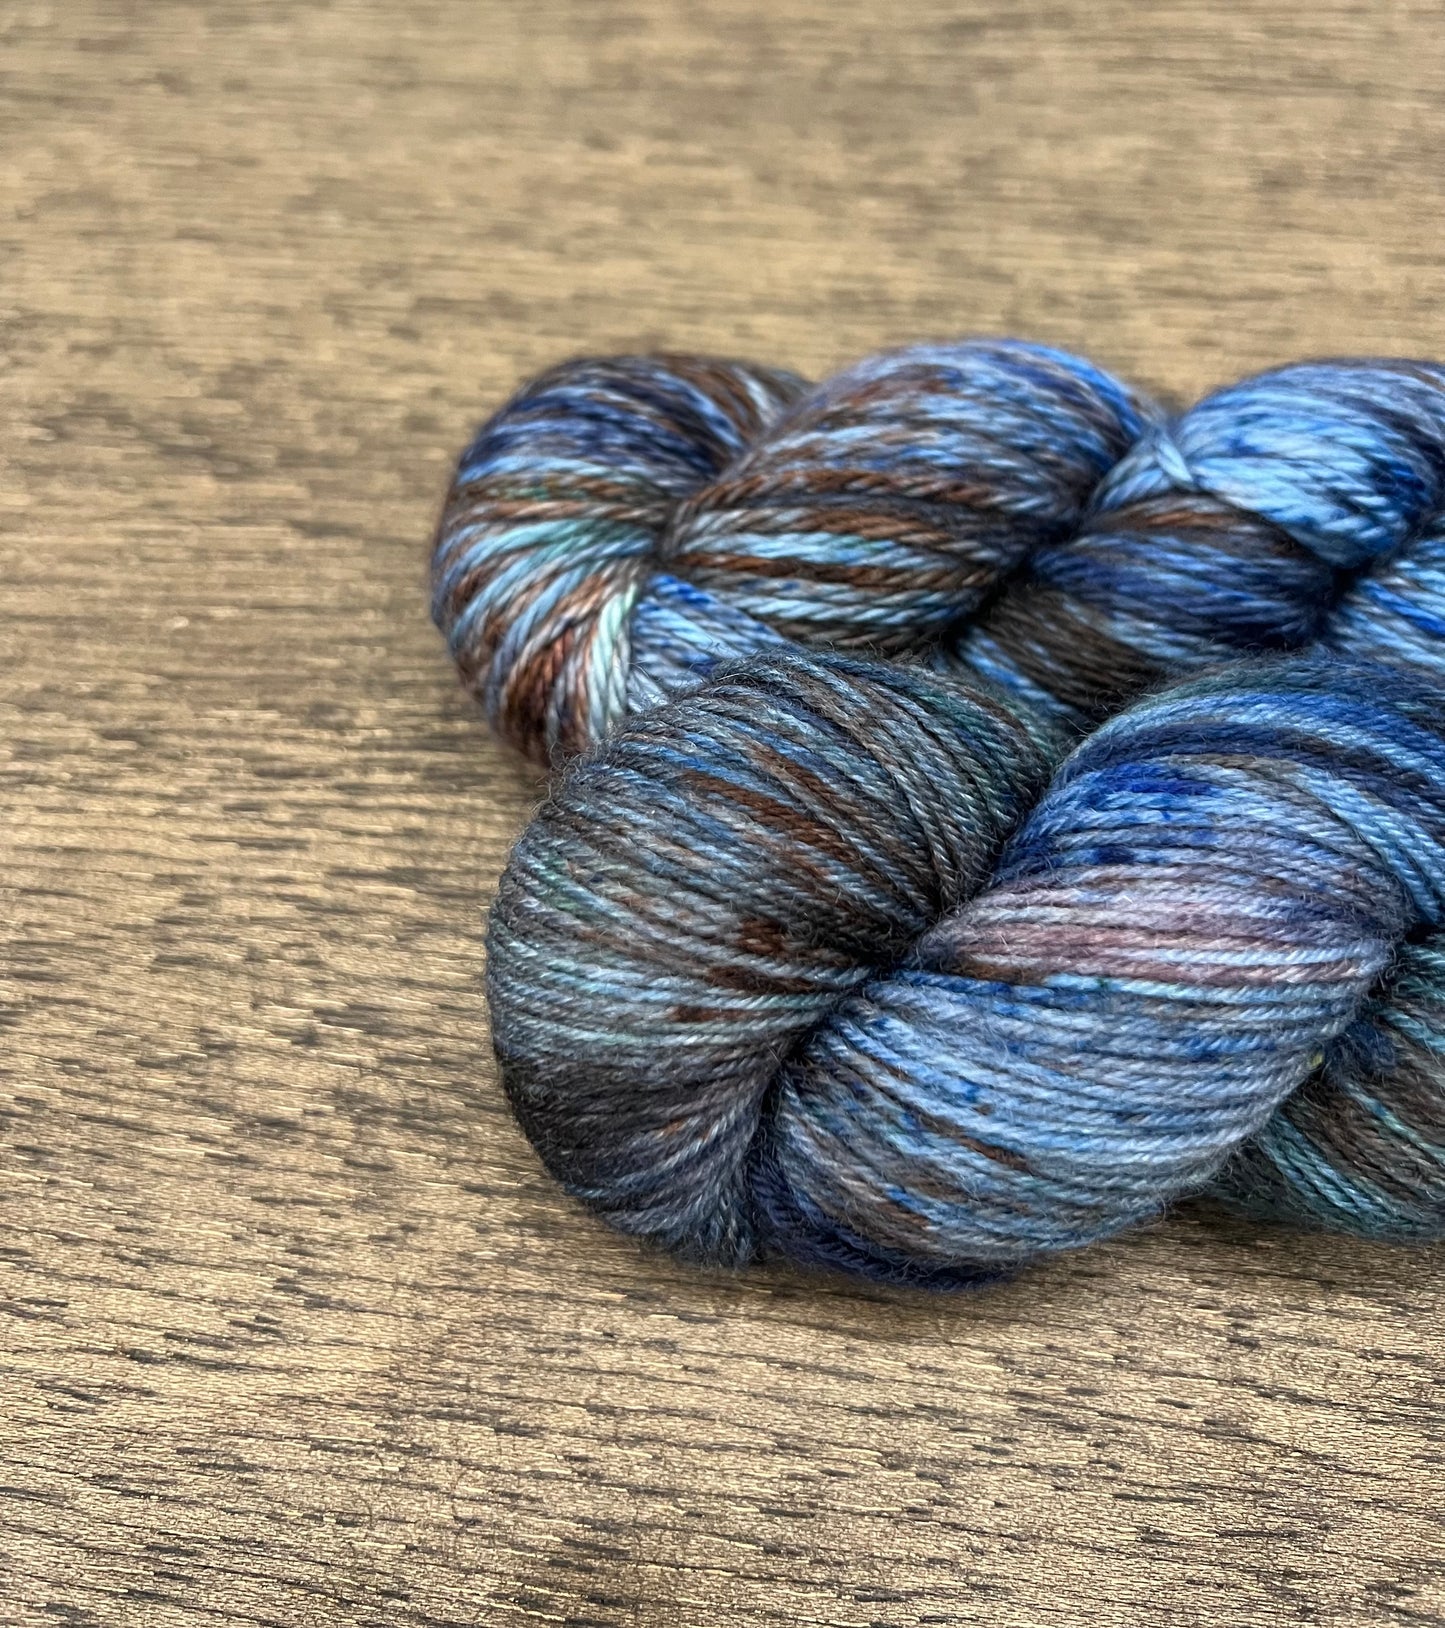 Hand Dyed Yarn Club Monthly Subscription OUTLANDER inspired Knitting Crochet Gift APRIL Mystery Skein for Crafters